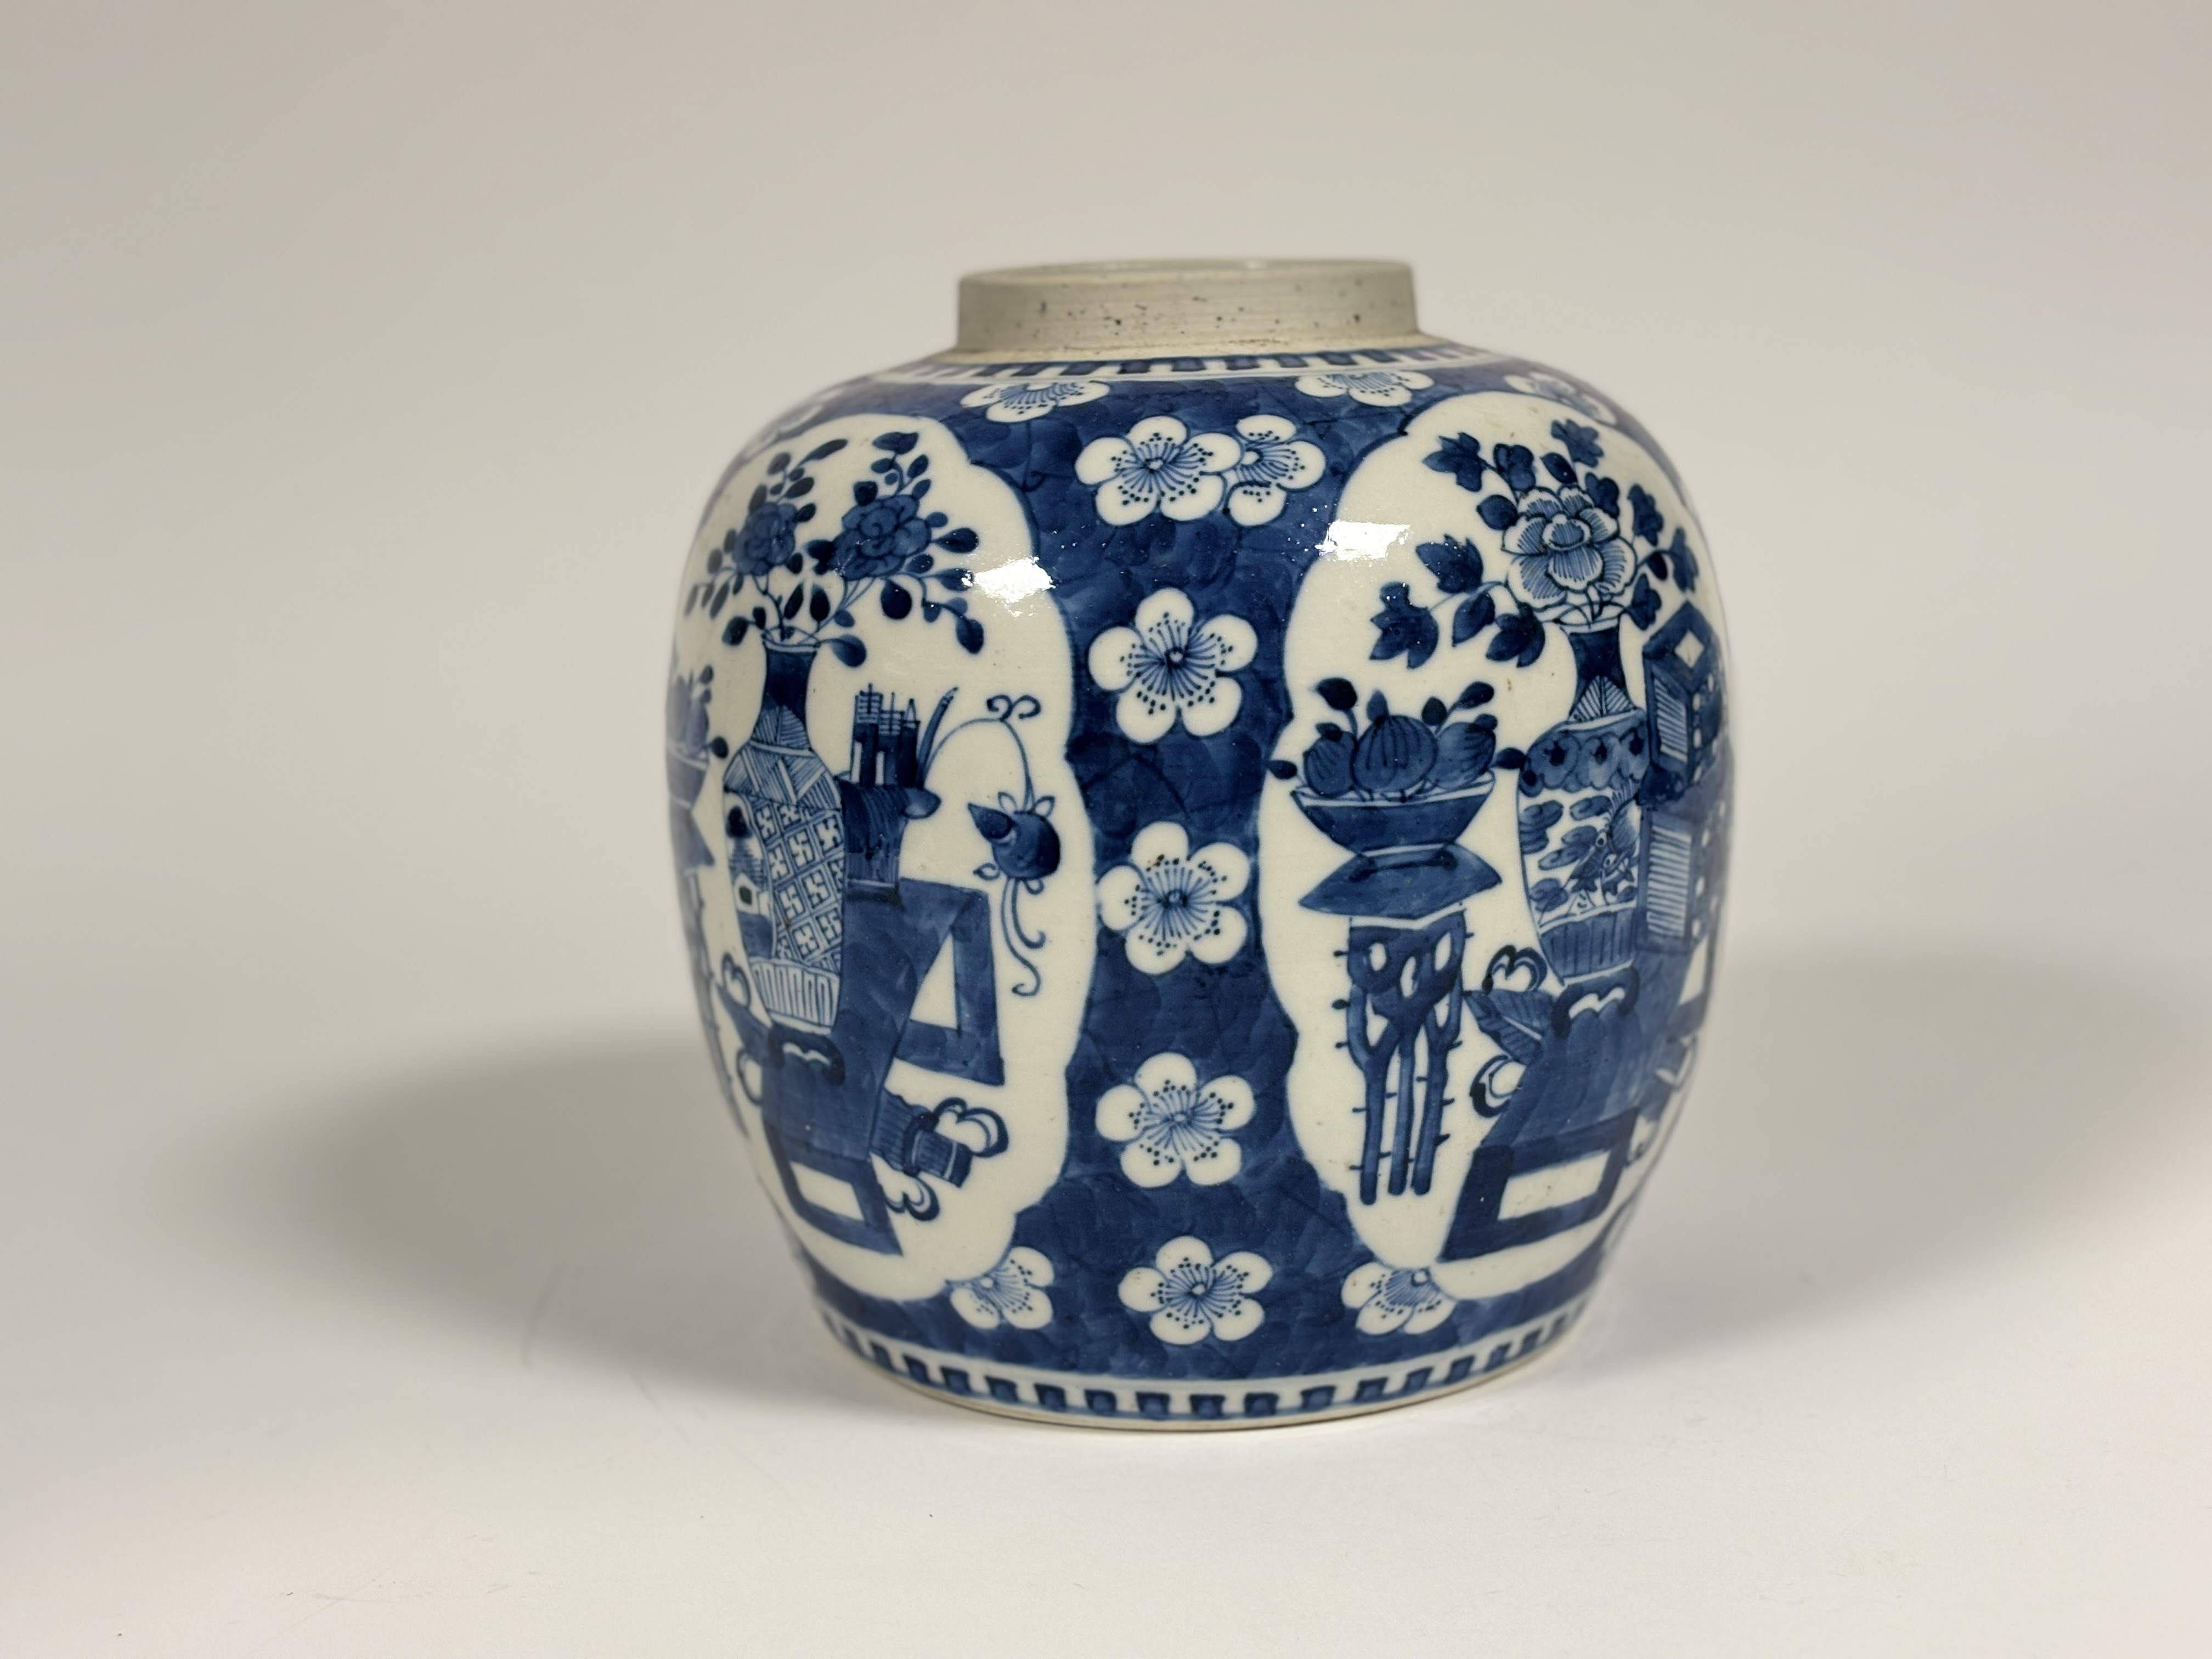 A Chinese blue and white porcelain ovoid jar, probably Kangxi period, painted with shaped cartouches - Image 4 of 6